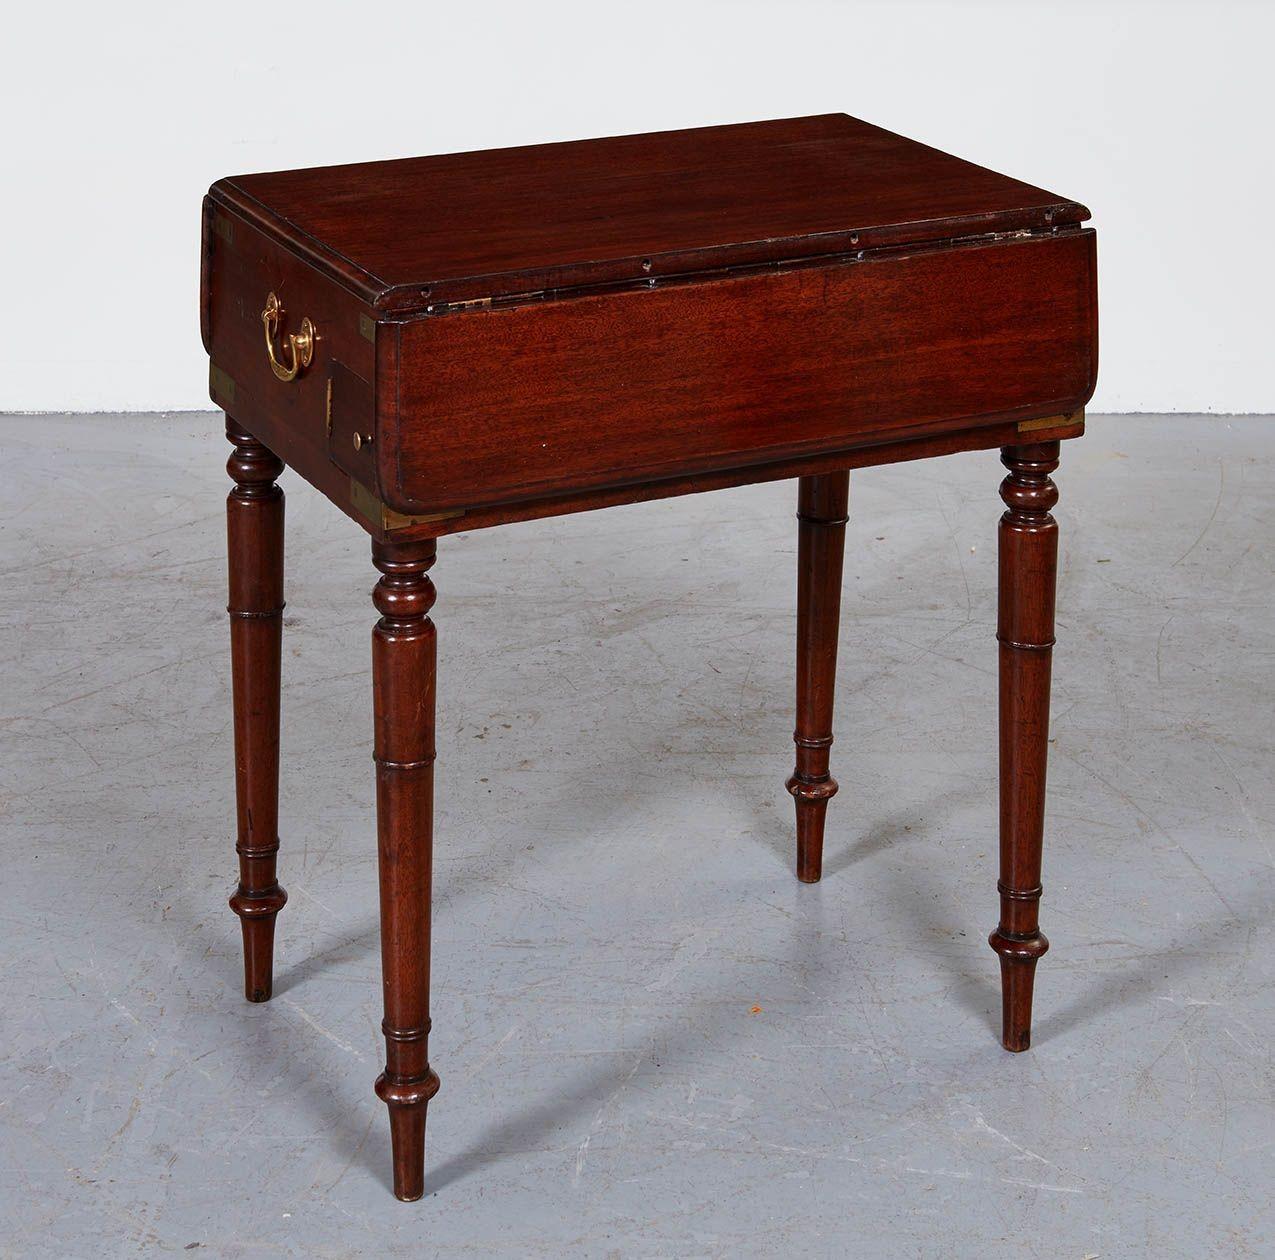 Rare English early 19th century mahogany campaign pembroke/writing table, having top and two drop leaves with thumb molded edge, with hinged top revealing a writing and dressing table, with leather topped writing slope and pewter lined pen and ink